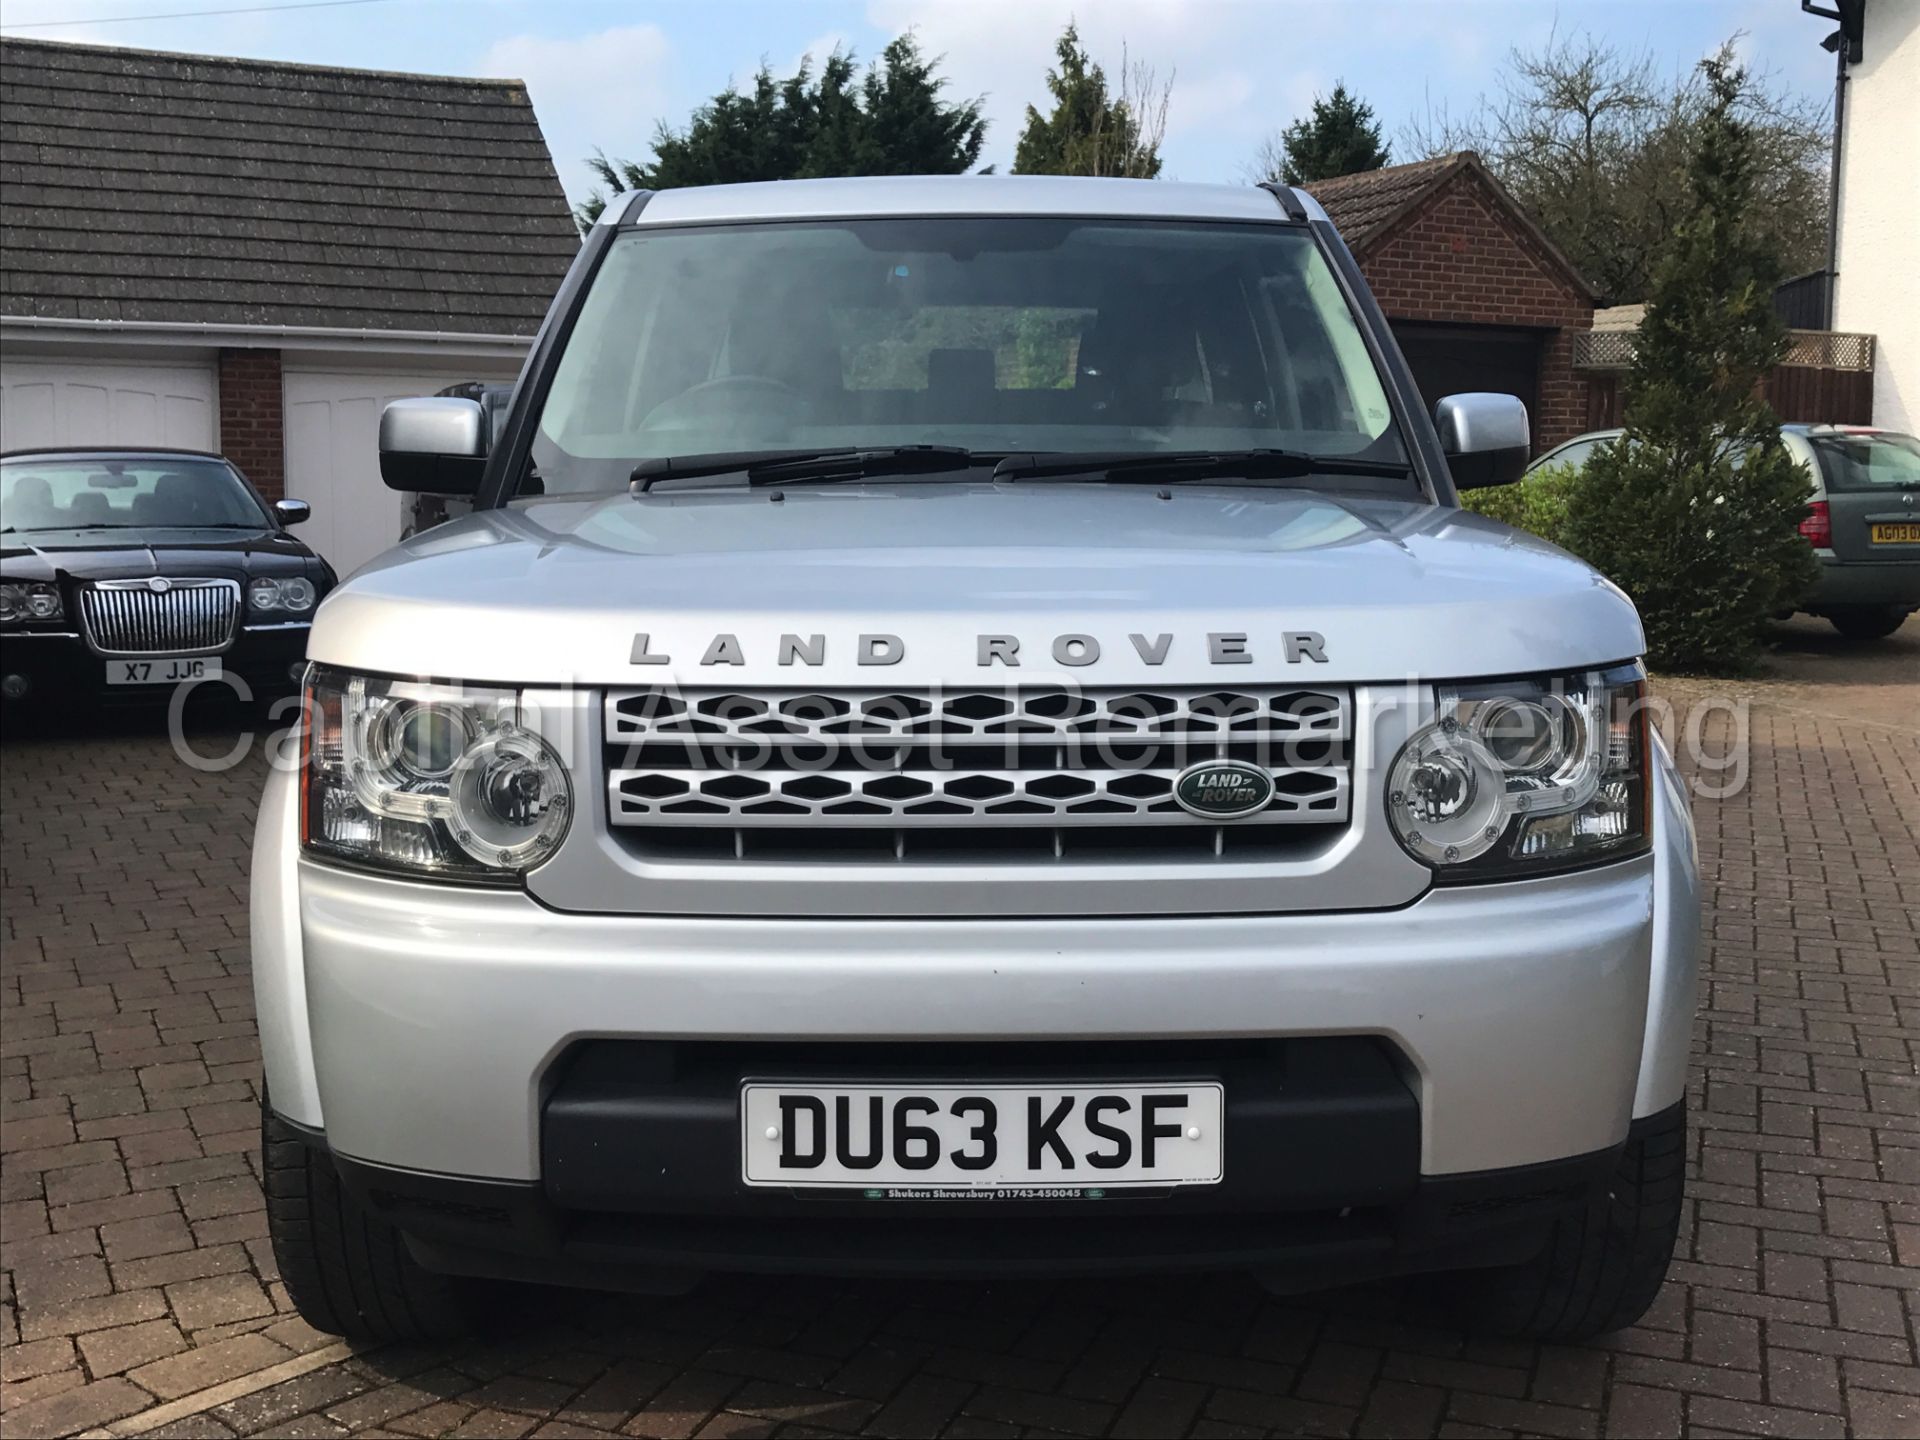 LAND ROVER DISCOVERY 4 (2014 MODEL) '3.0 SDV6 - 8 SPEED AUTO - 7 SEATER' **HUGE SPEC** (1 OWNER) - Image 9 of 30